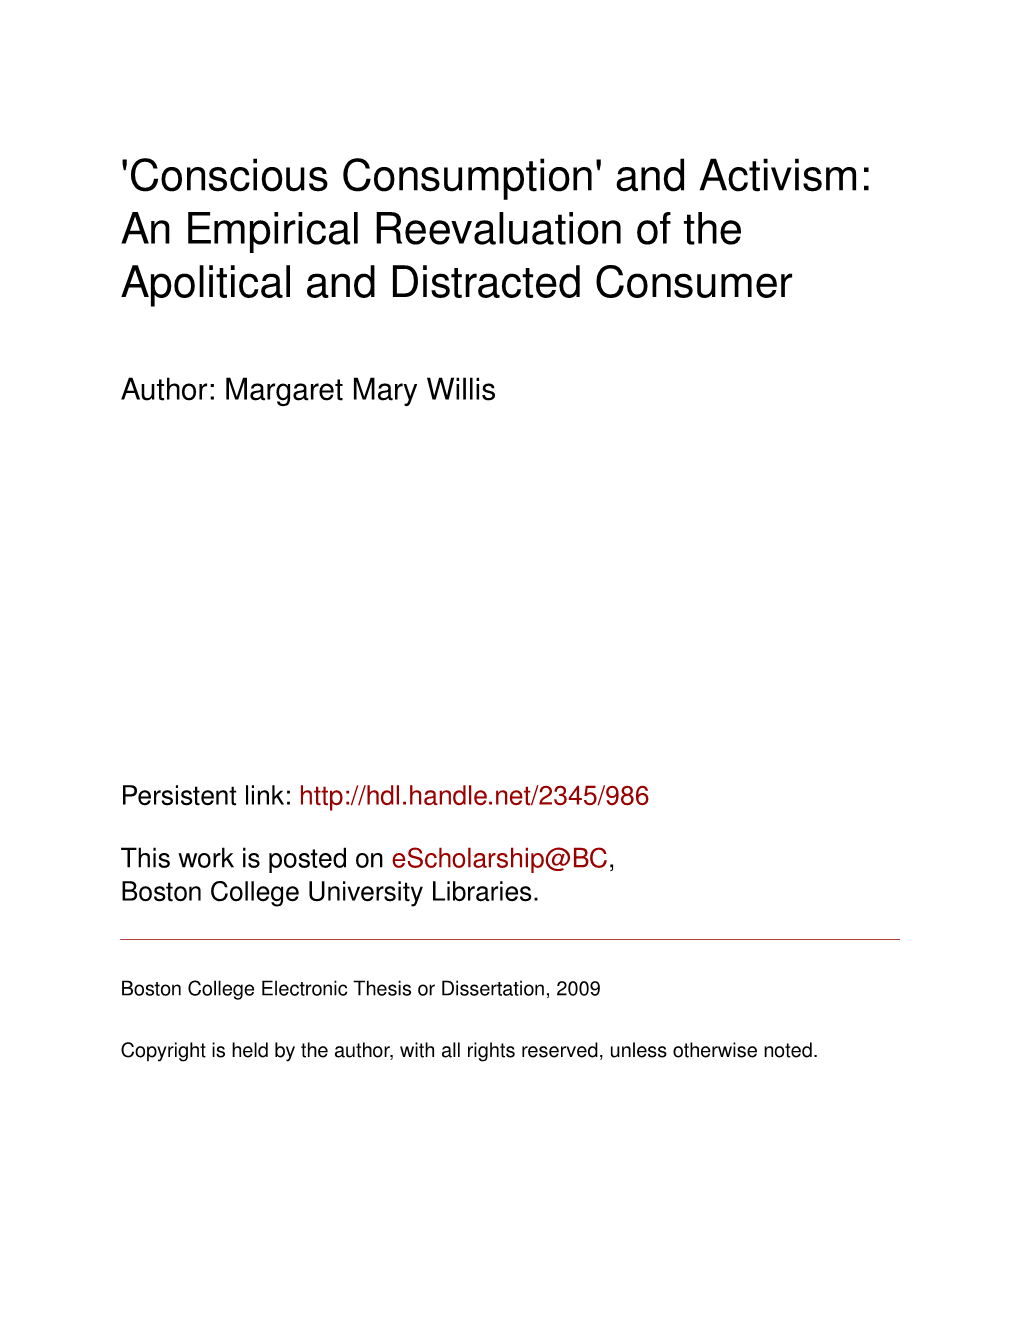 'Conscious Consumption' and Activism: an Empirical Reevaluation of the Apolitical and Distracted Consumer